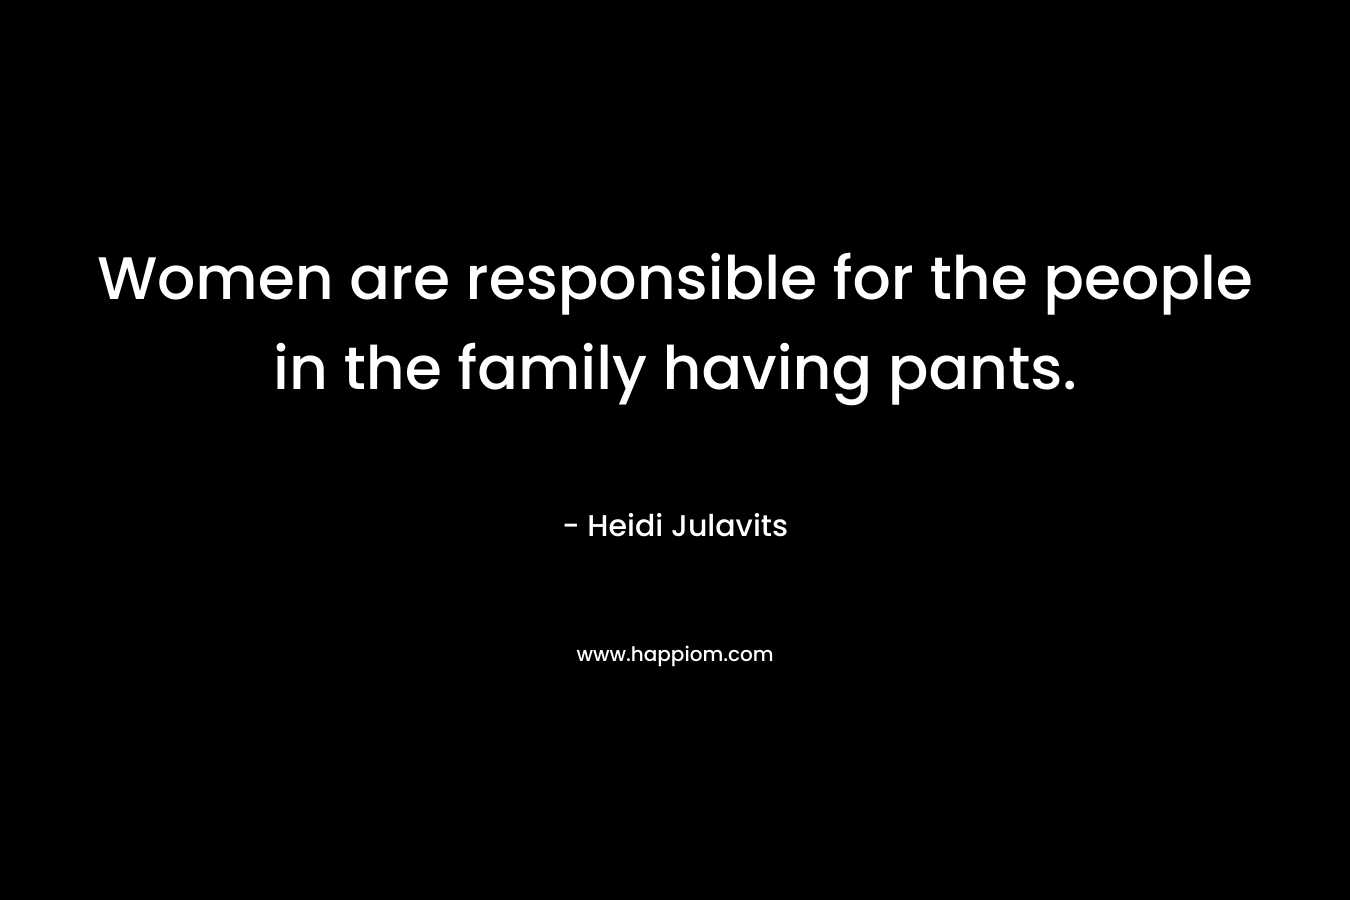 Women are responsible for the people in the family having pants.